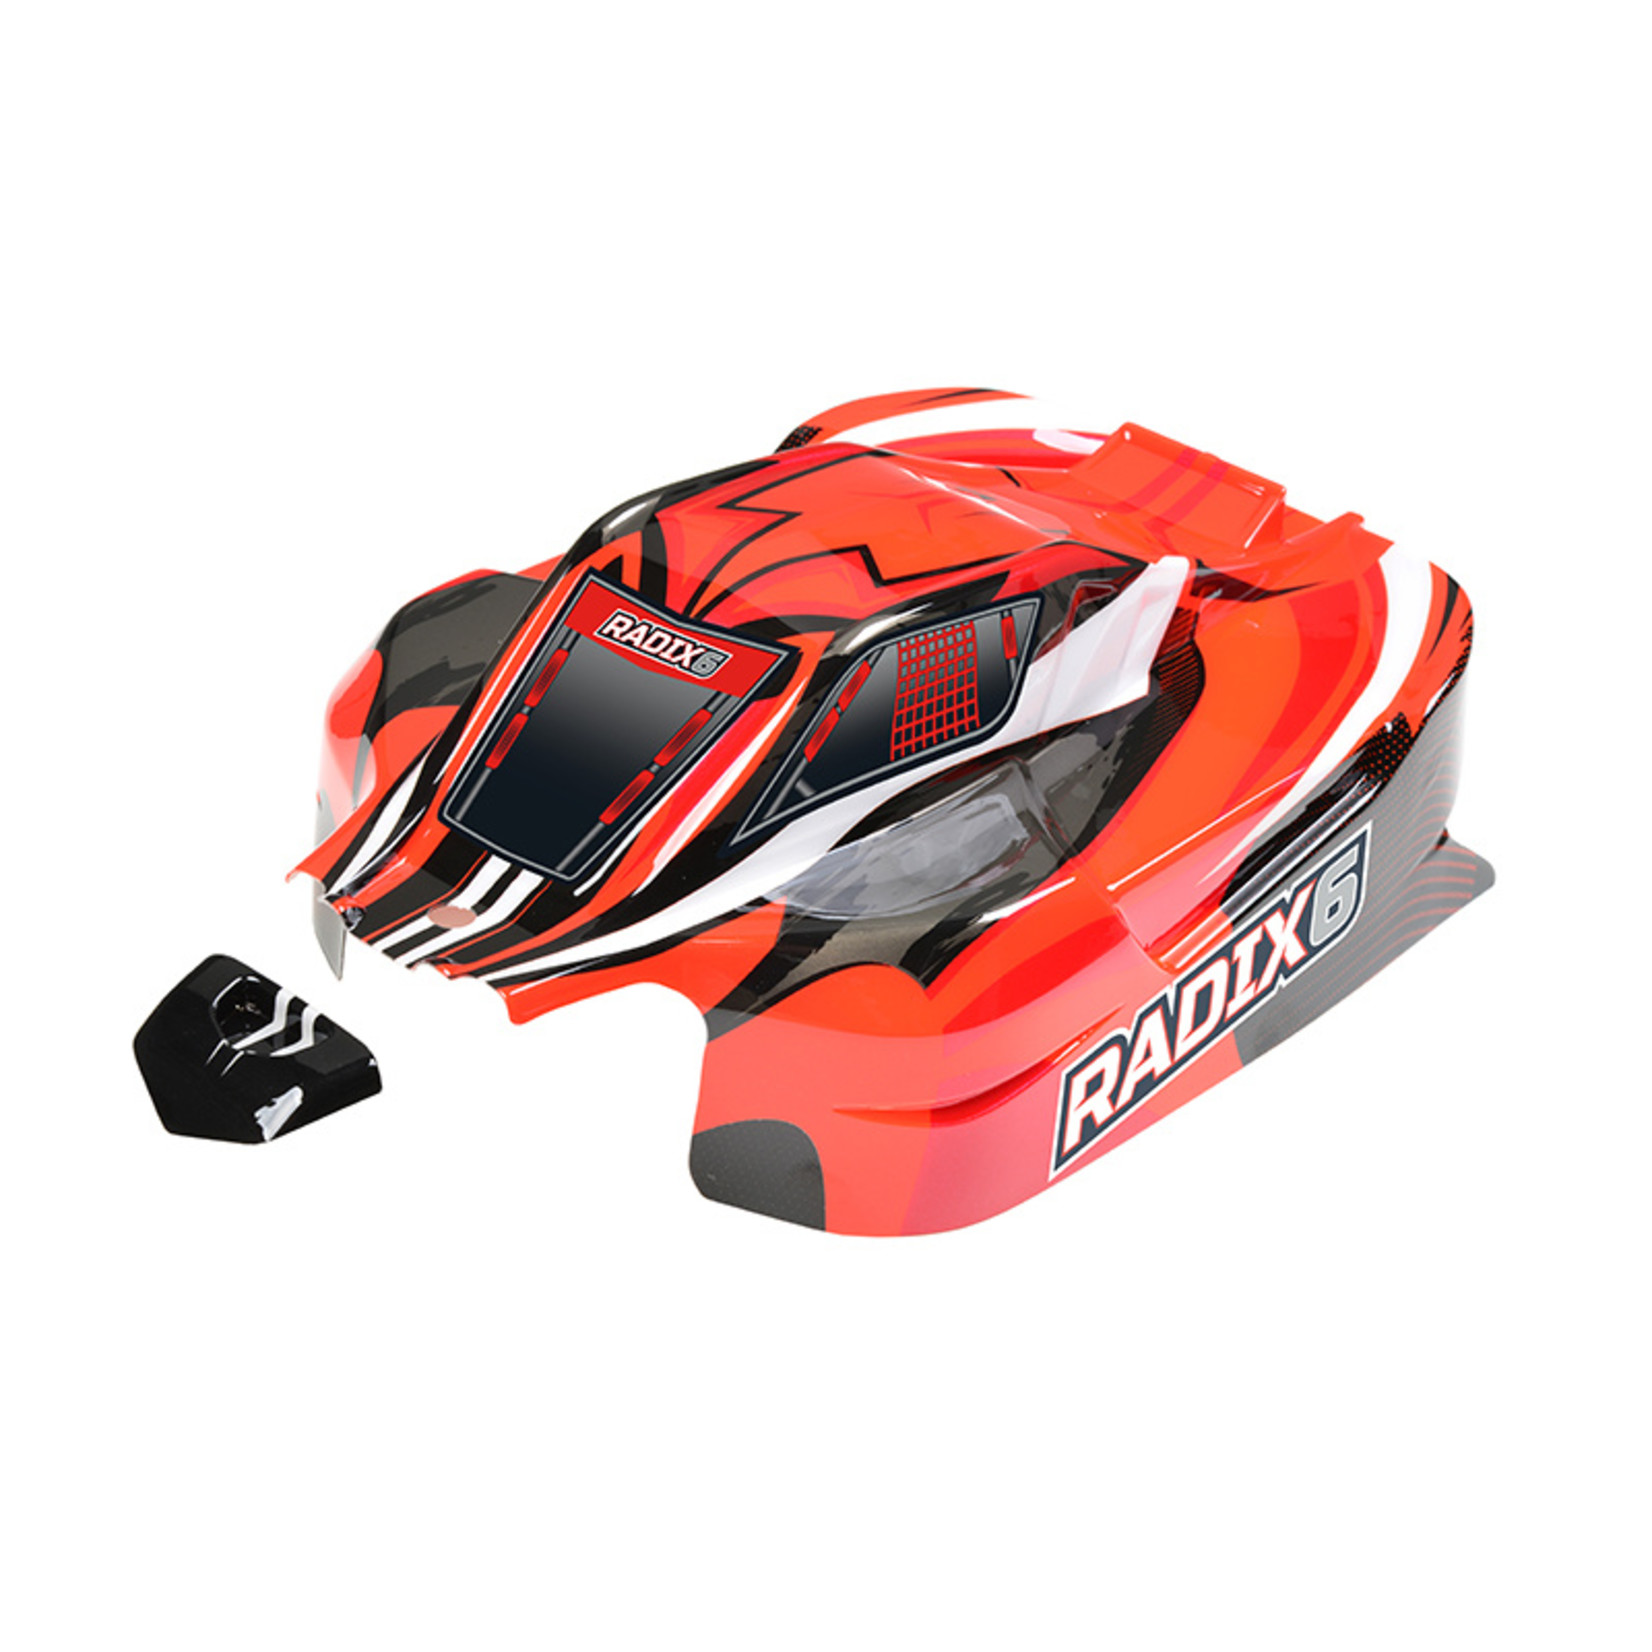 Corally (Team Corally) COR00185-375   Polycarbonate Body - Radix 6 XP - Painted - Cut - 1 pc